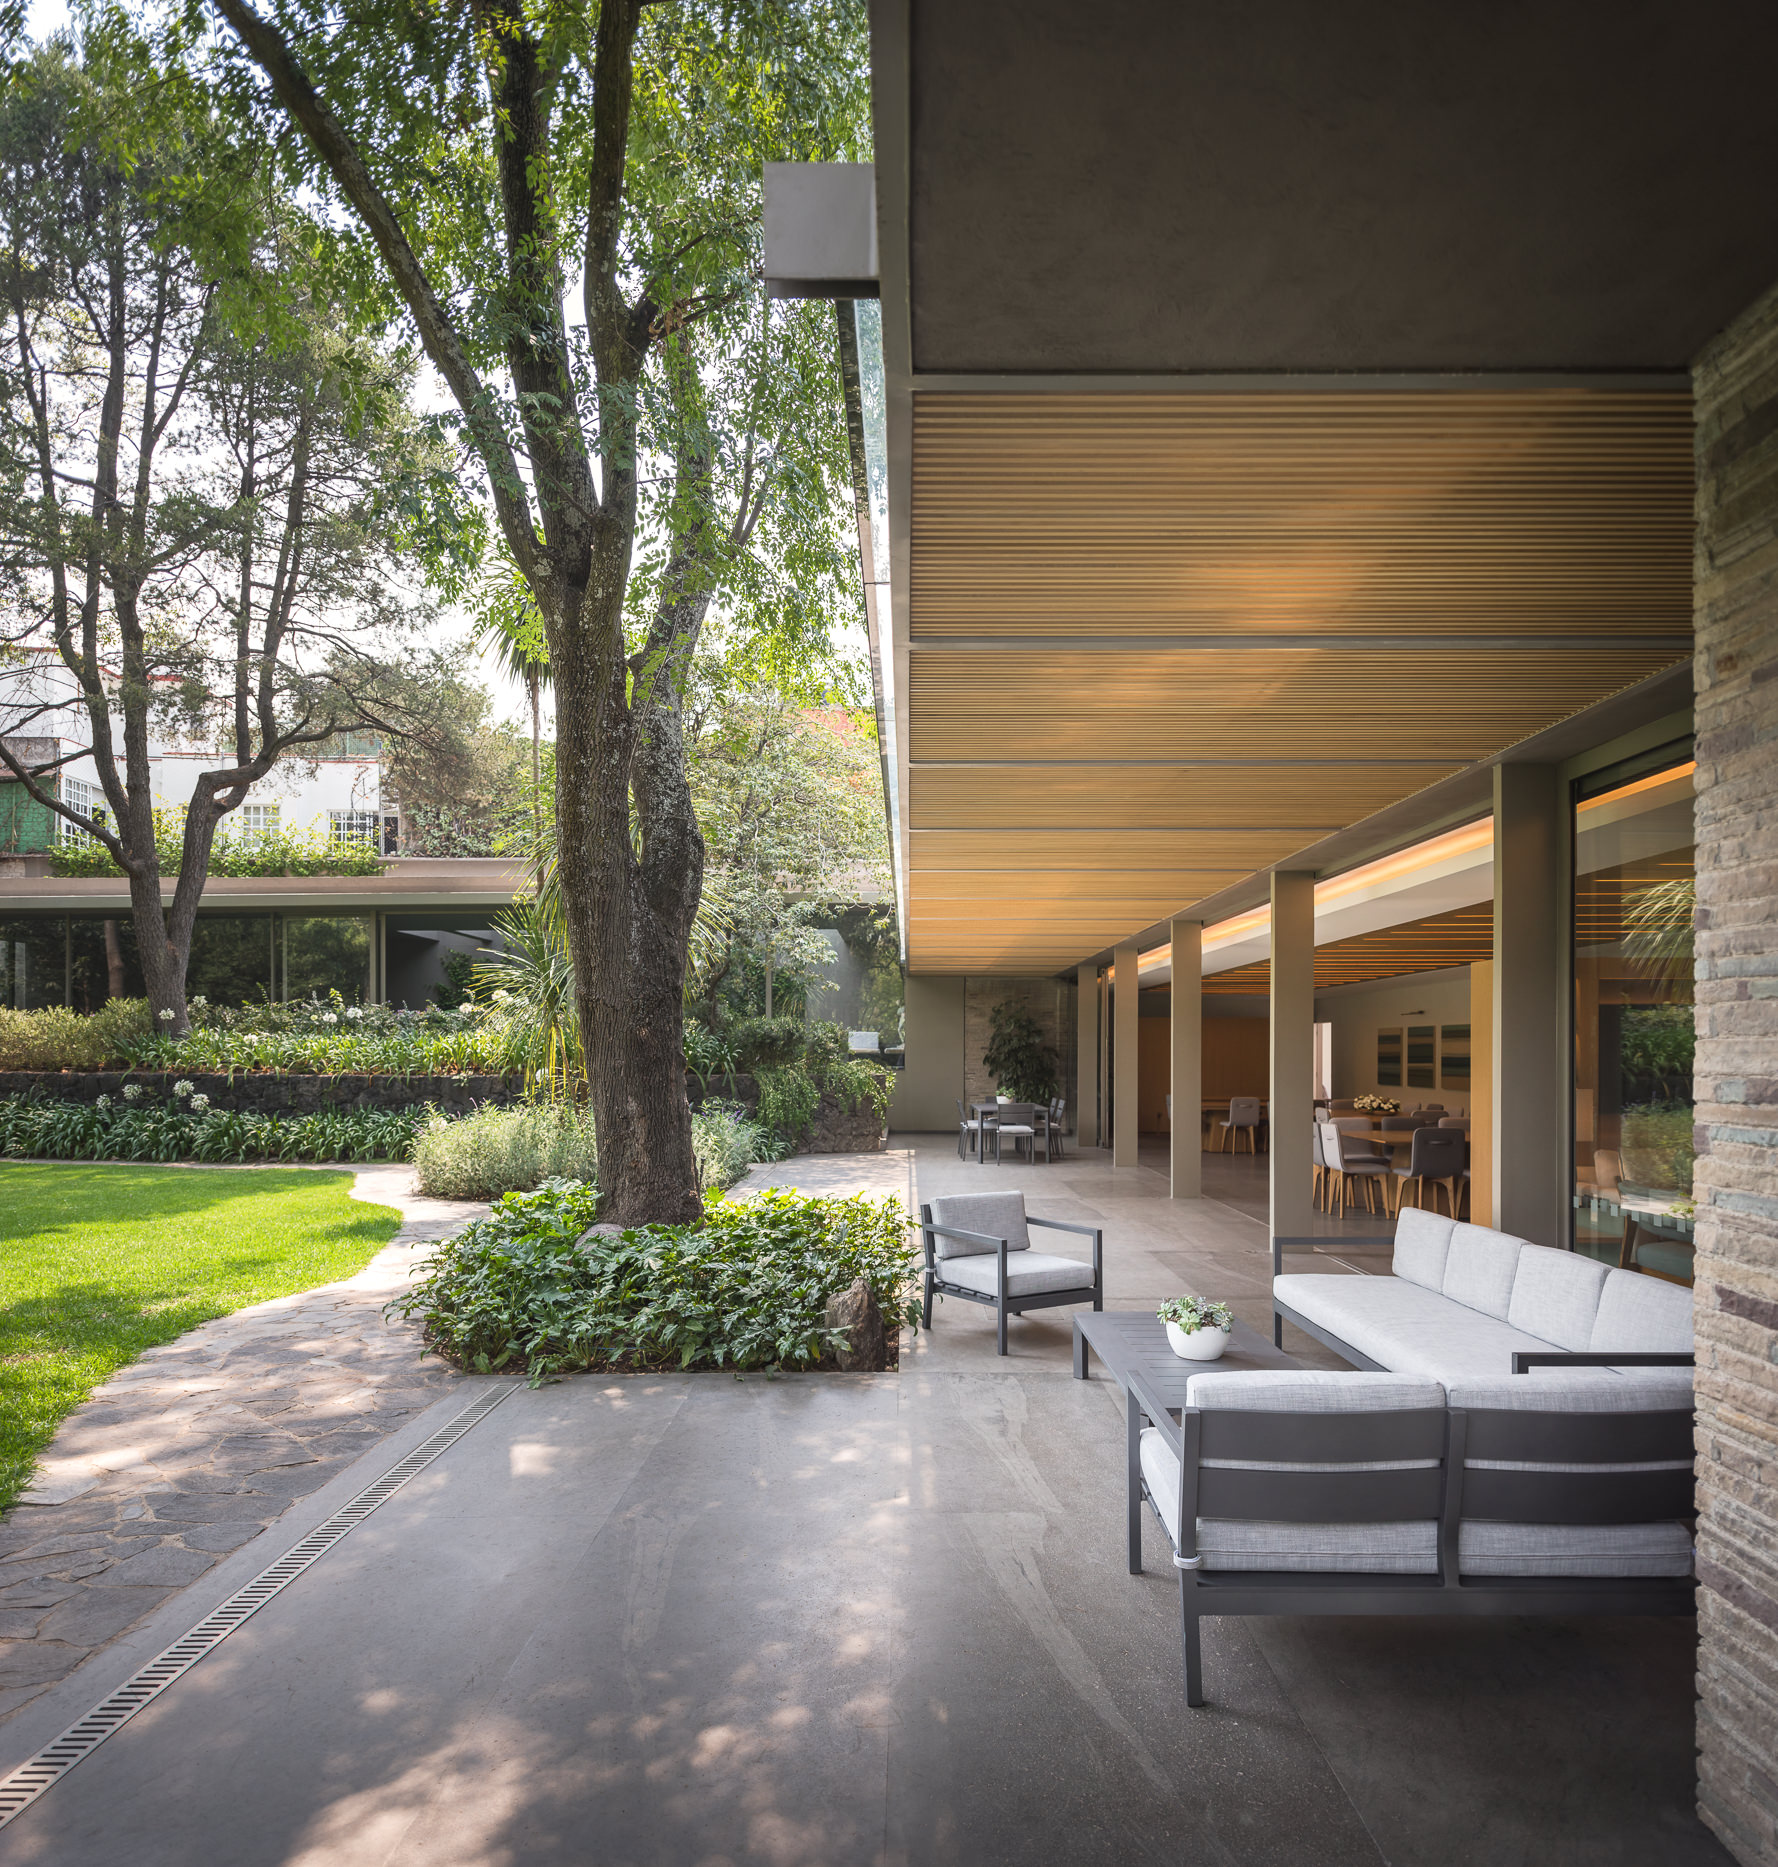 Covered outdoor areas, curated garden and lovely ambient lighting shape the landscape around the home